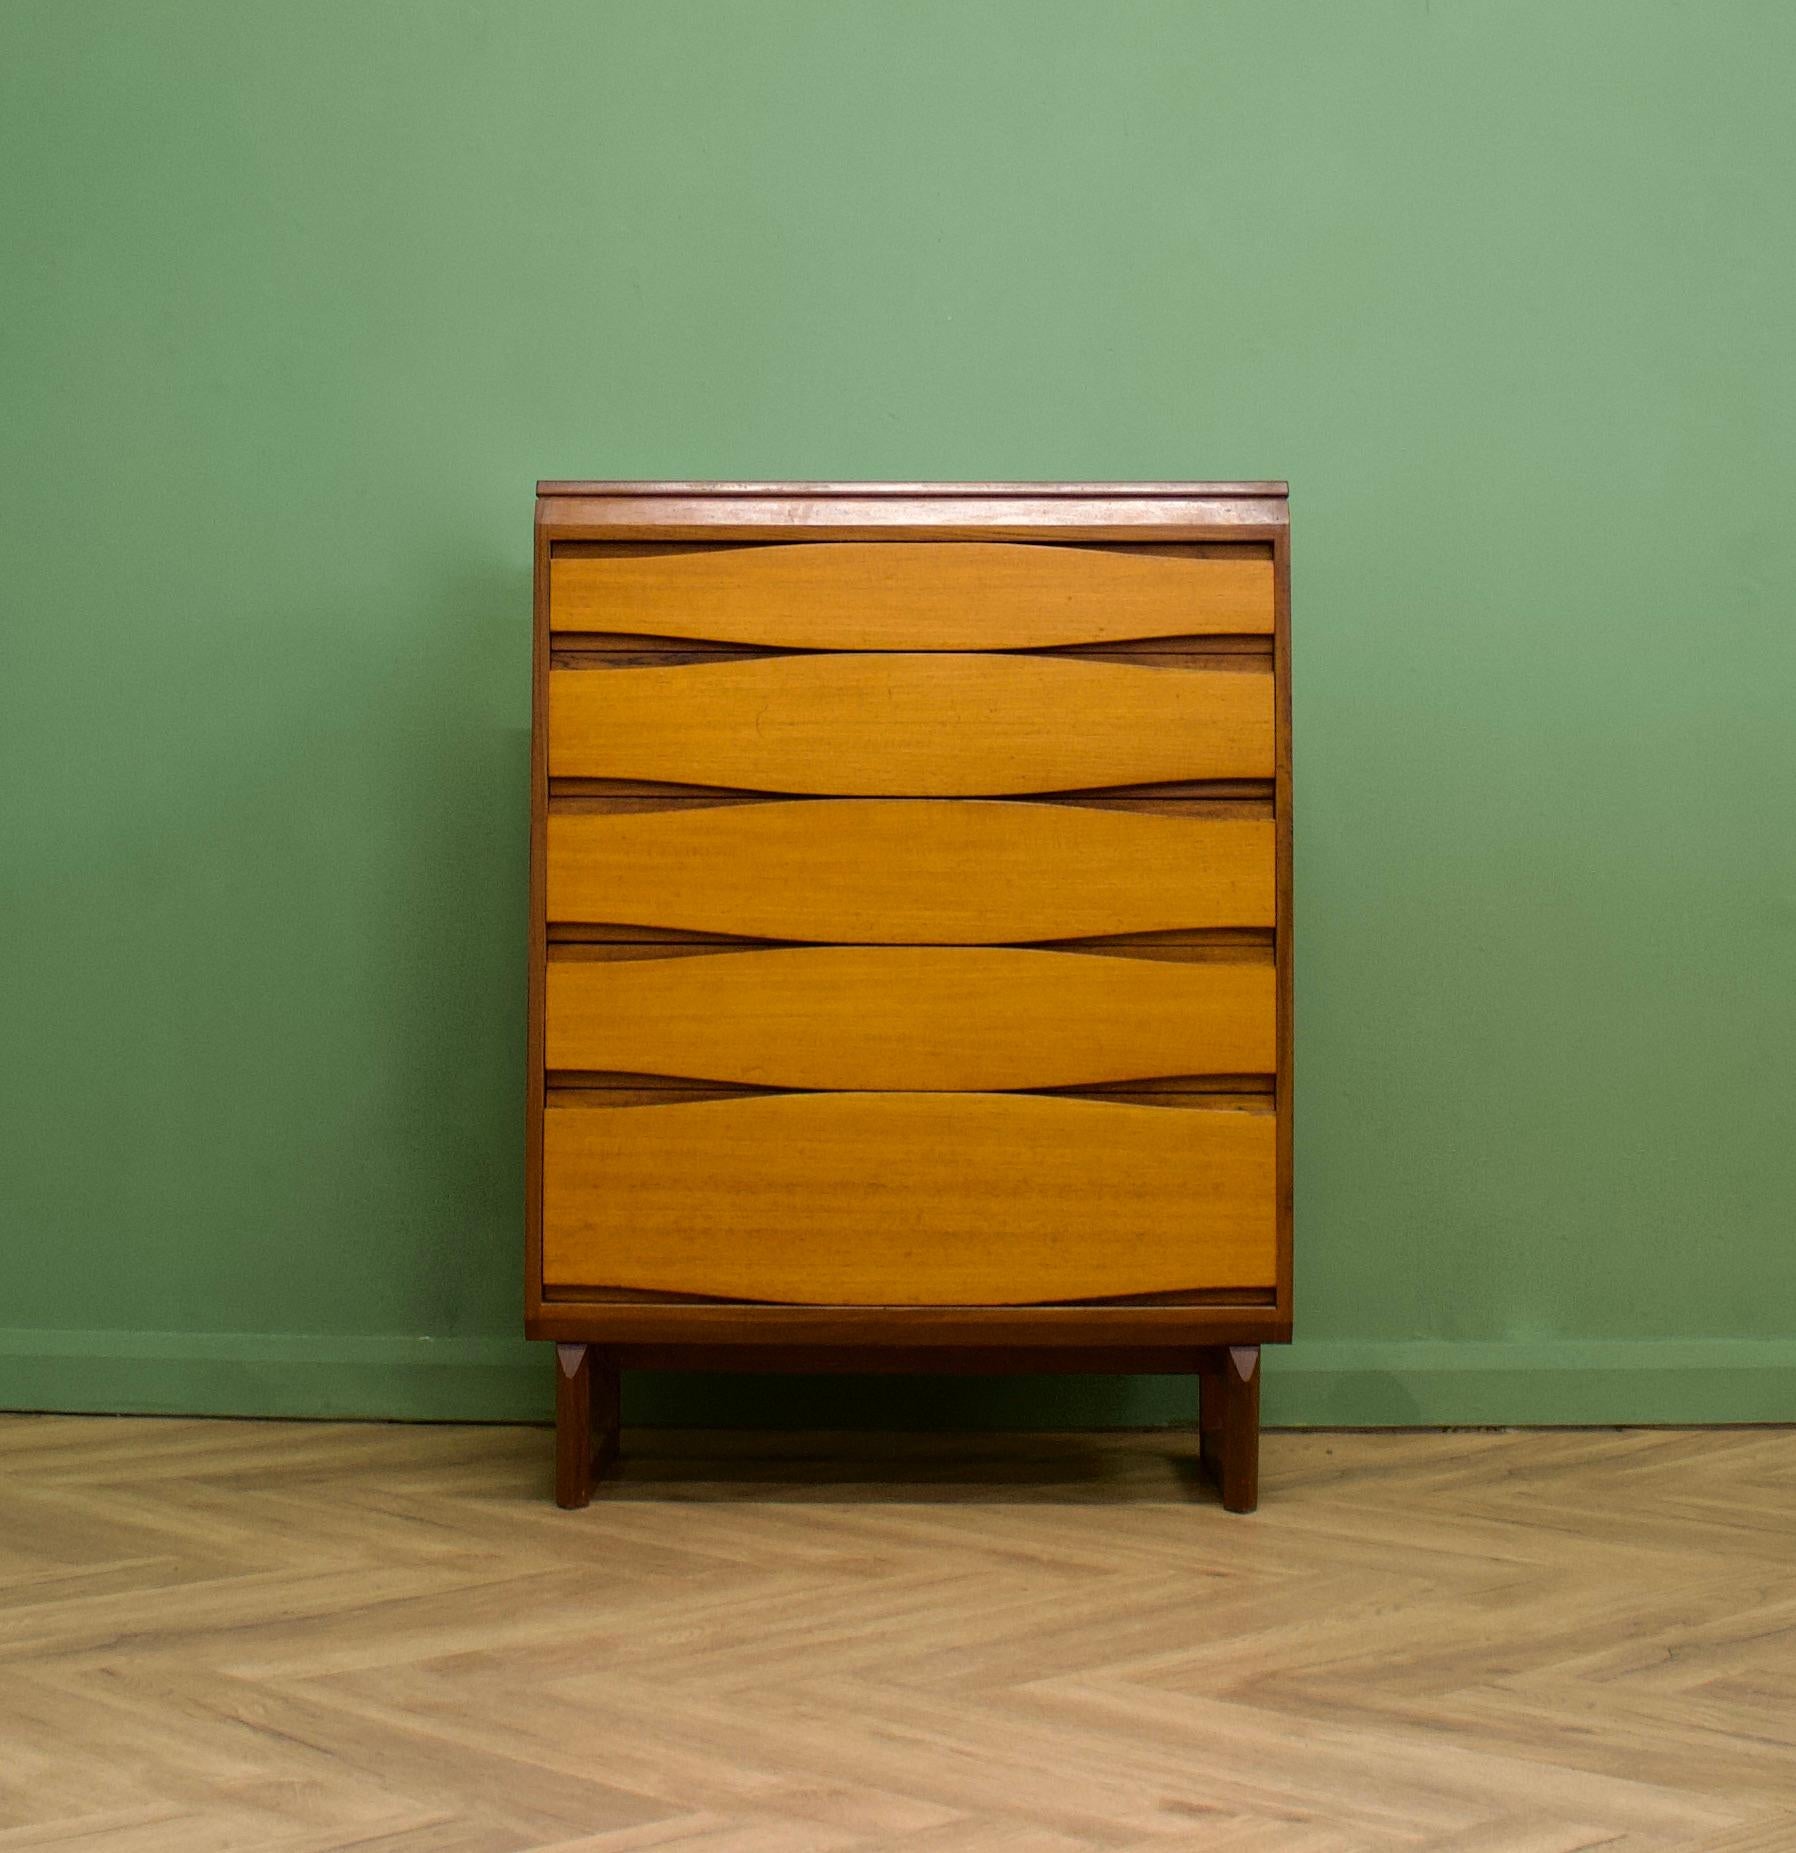 A mid century teak tallboy chest of drawers in the Danish style - circa 1960s - from White & Newton

The piece has a sleek modern look, with its recessed handle design